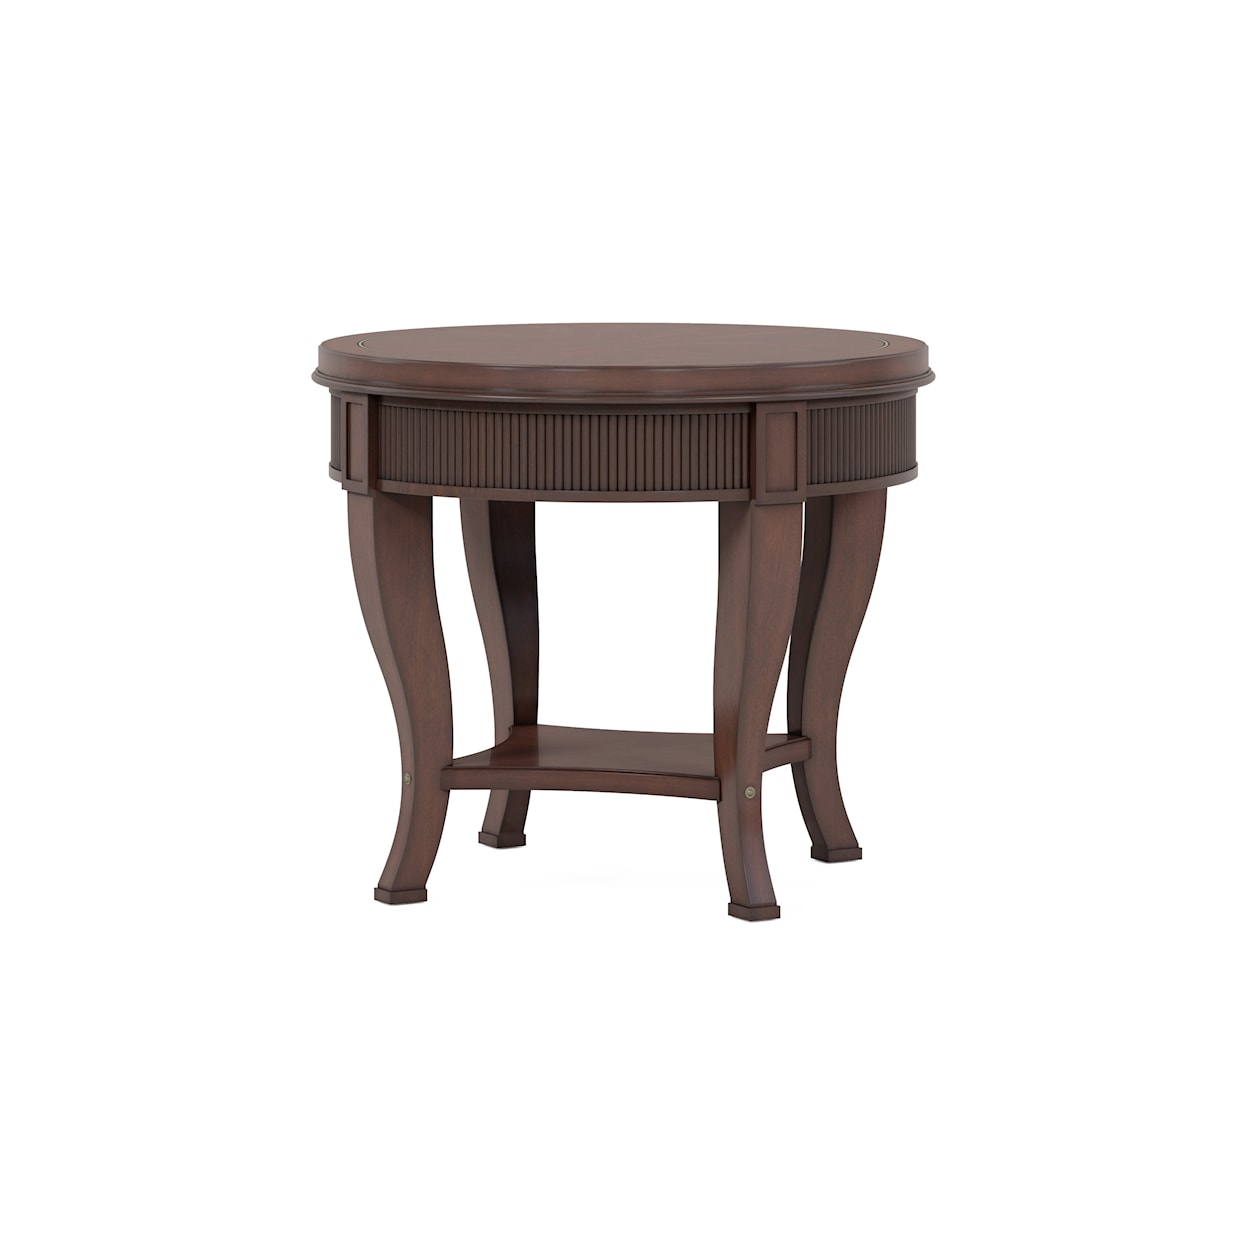 A.R.T. Furniture Inc 328 - Revival Round End Table